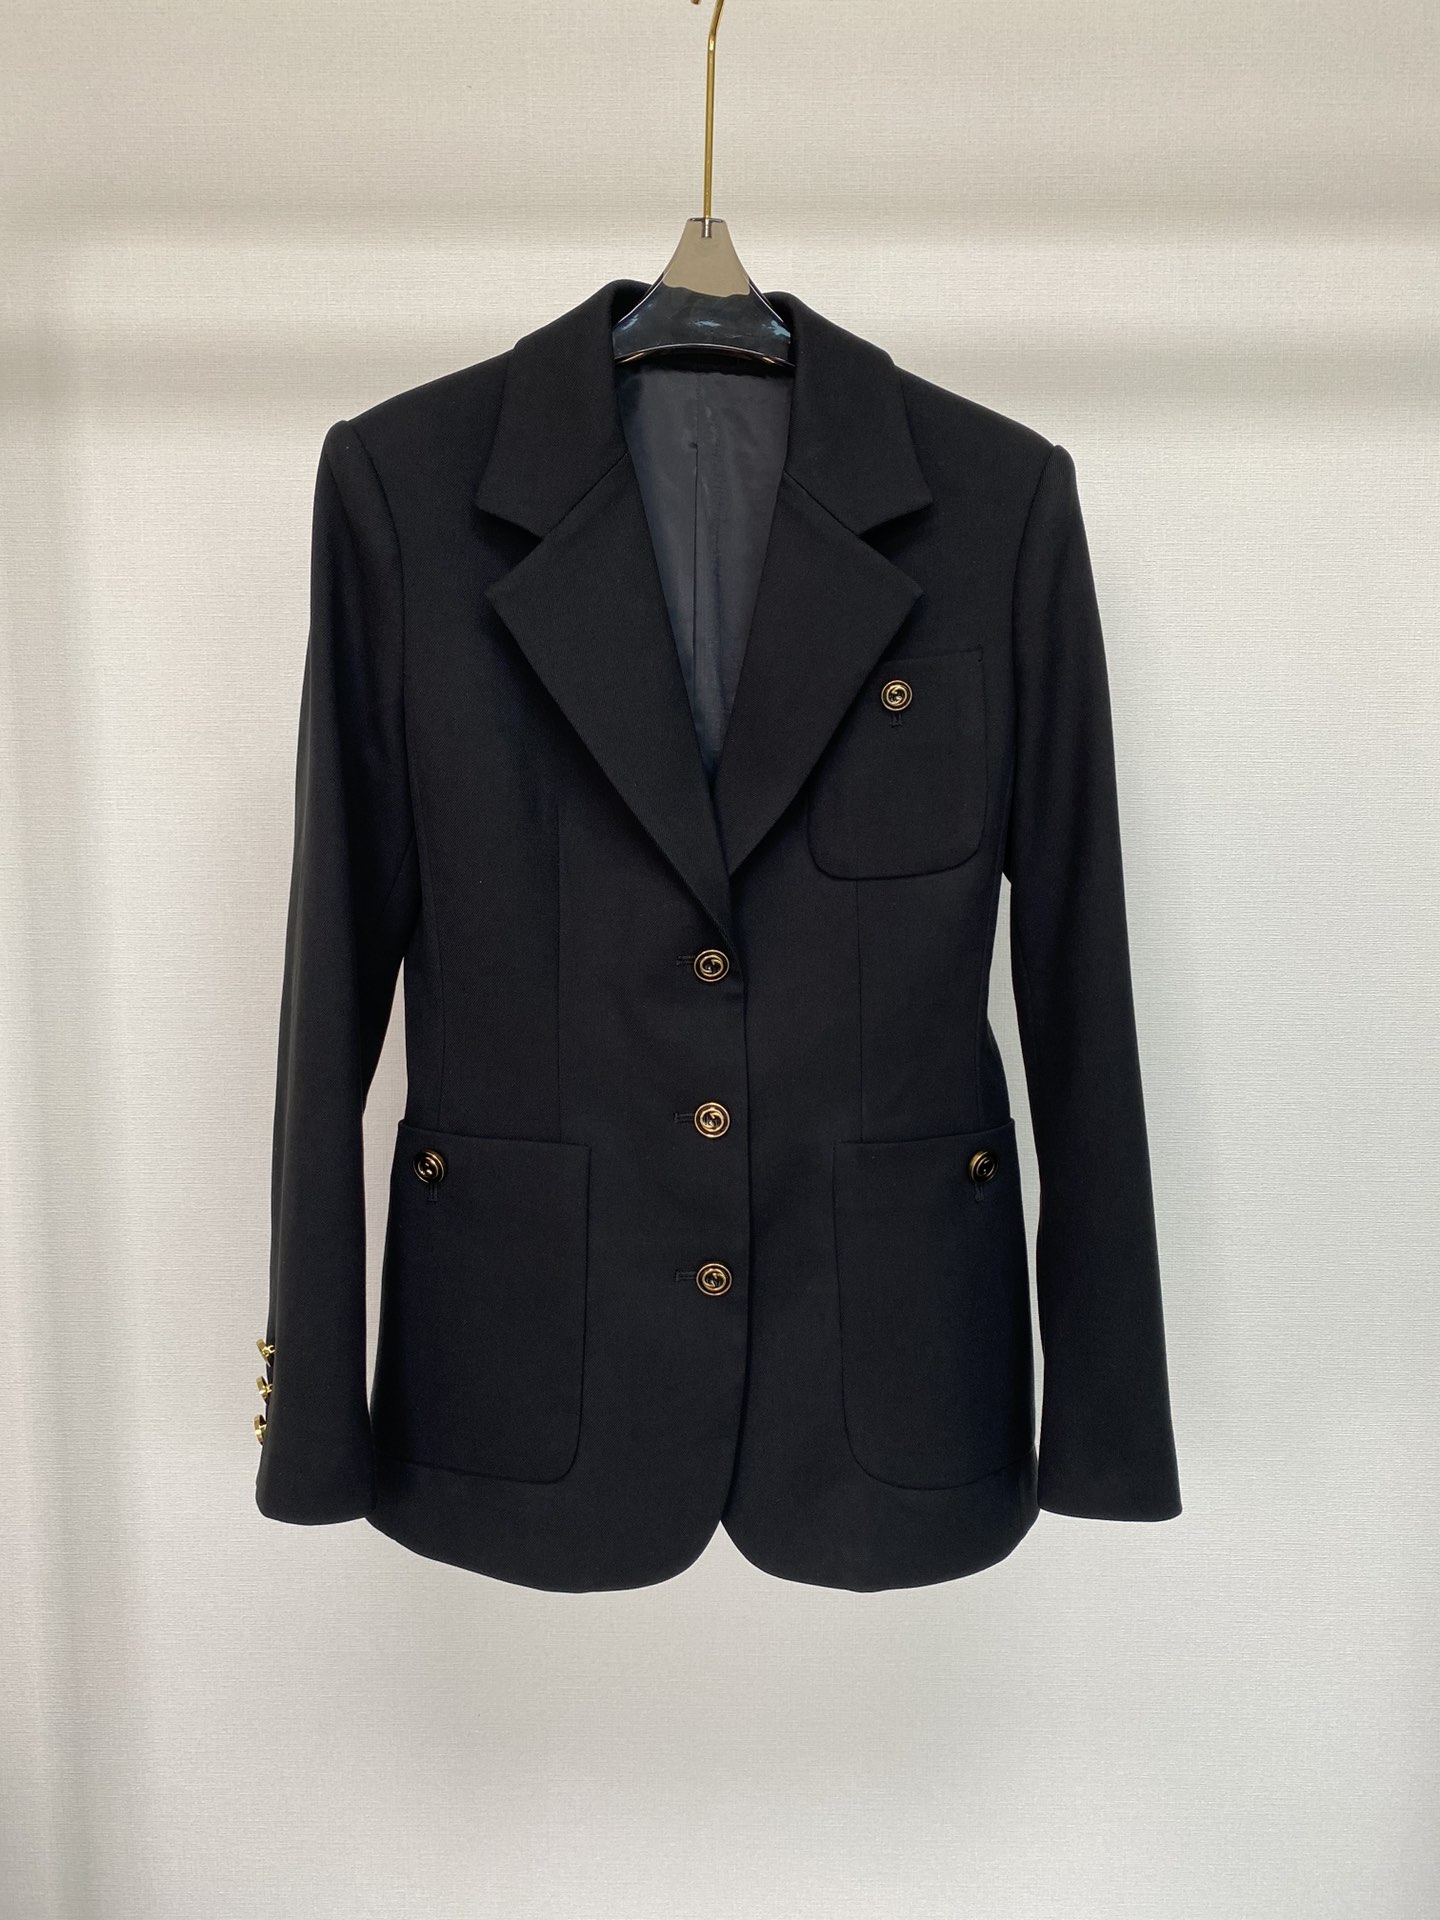 Gucci Clothing Coats & Jackets Wool Fall/Winter Collection